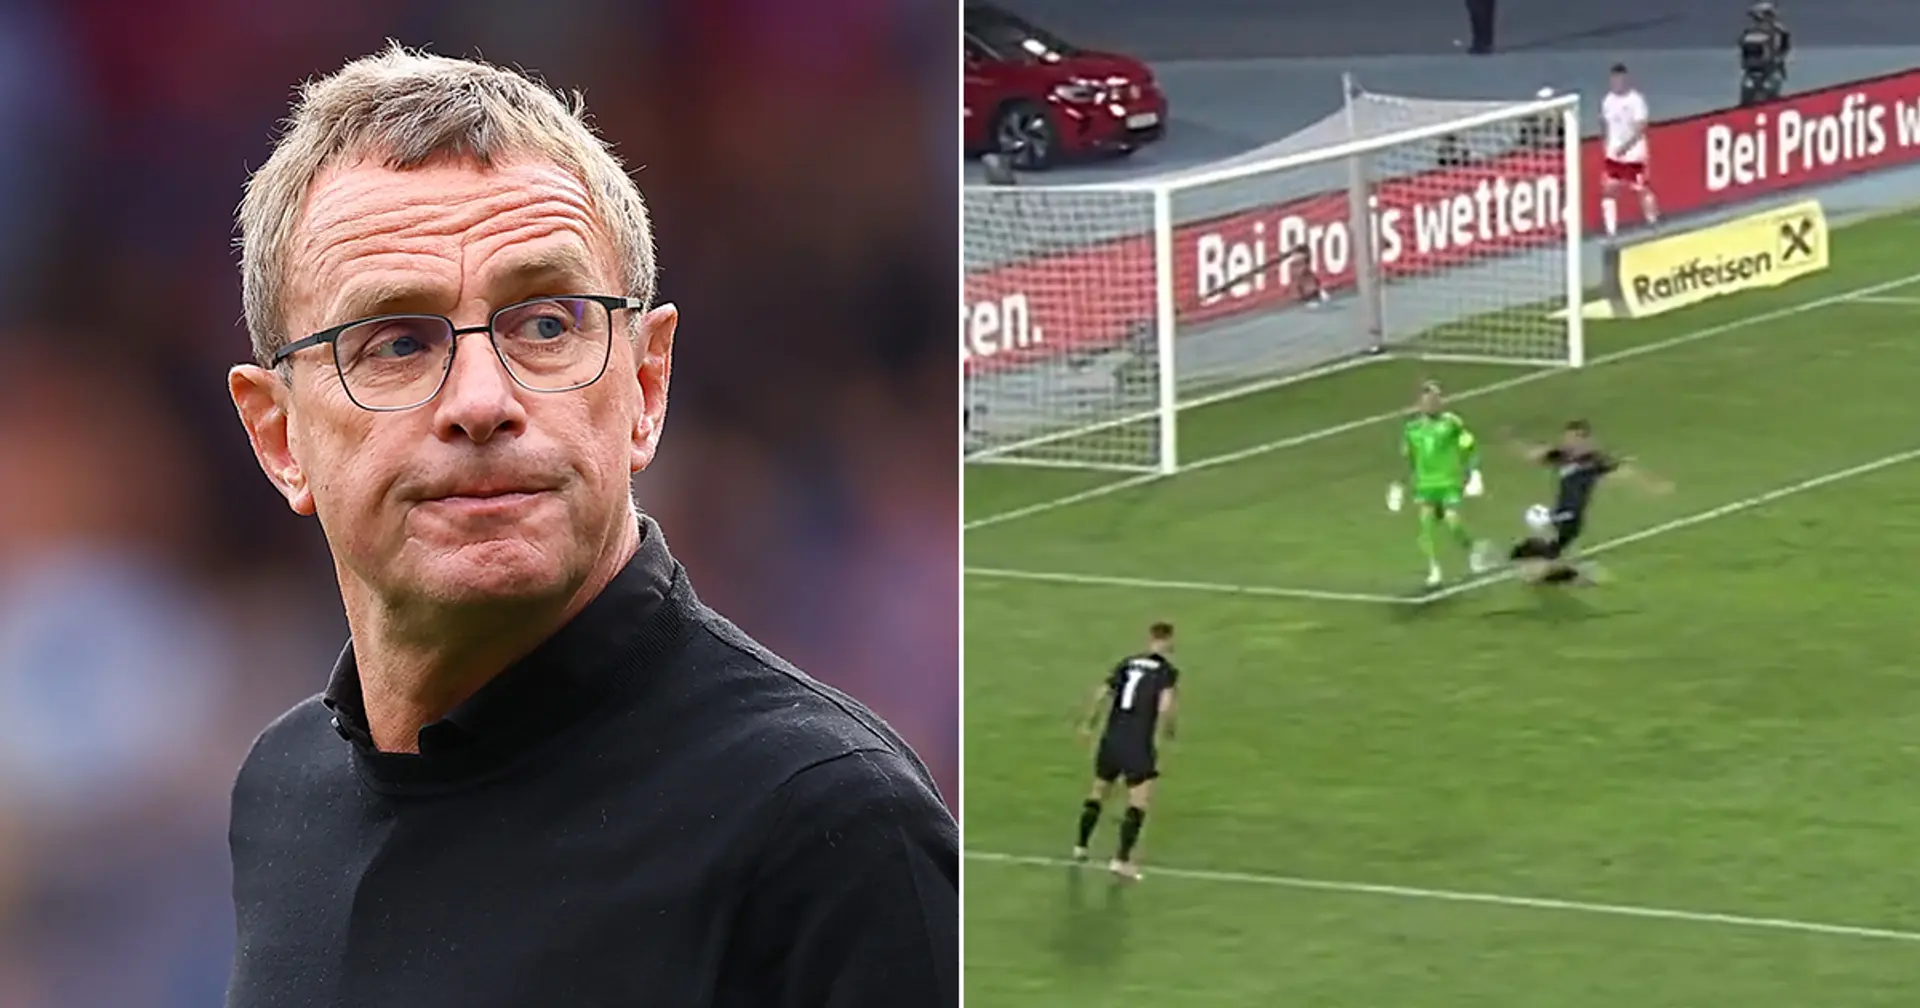 'We pressed like this for 32 minutes': United fans react as Rangnick's high pressing works a treat for Austria